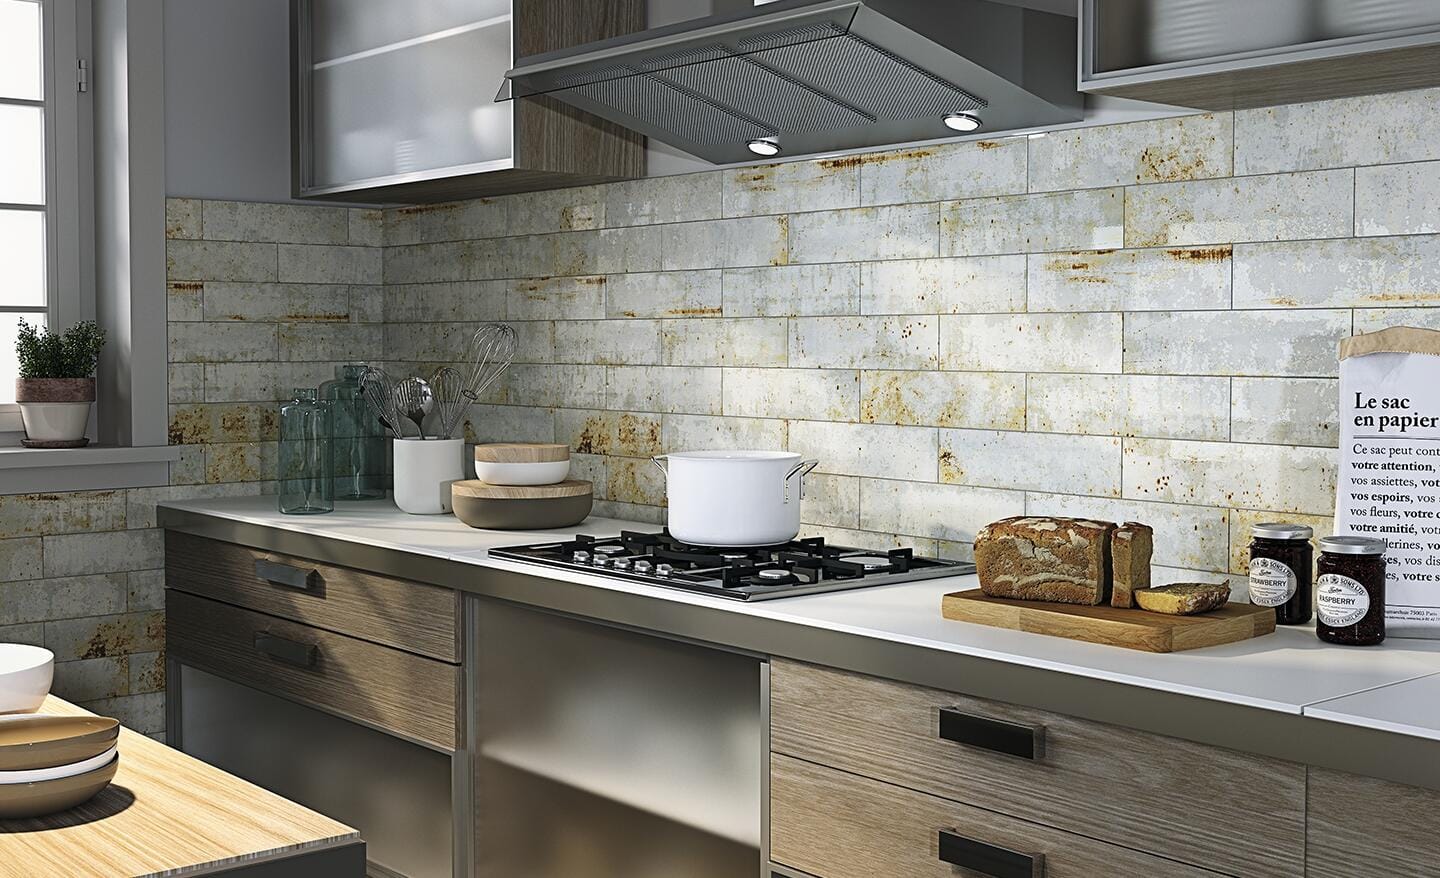 A kitchen with a tile wall